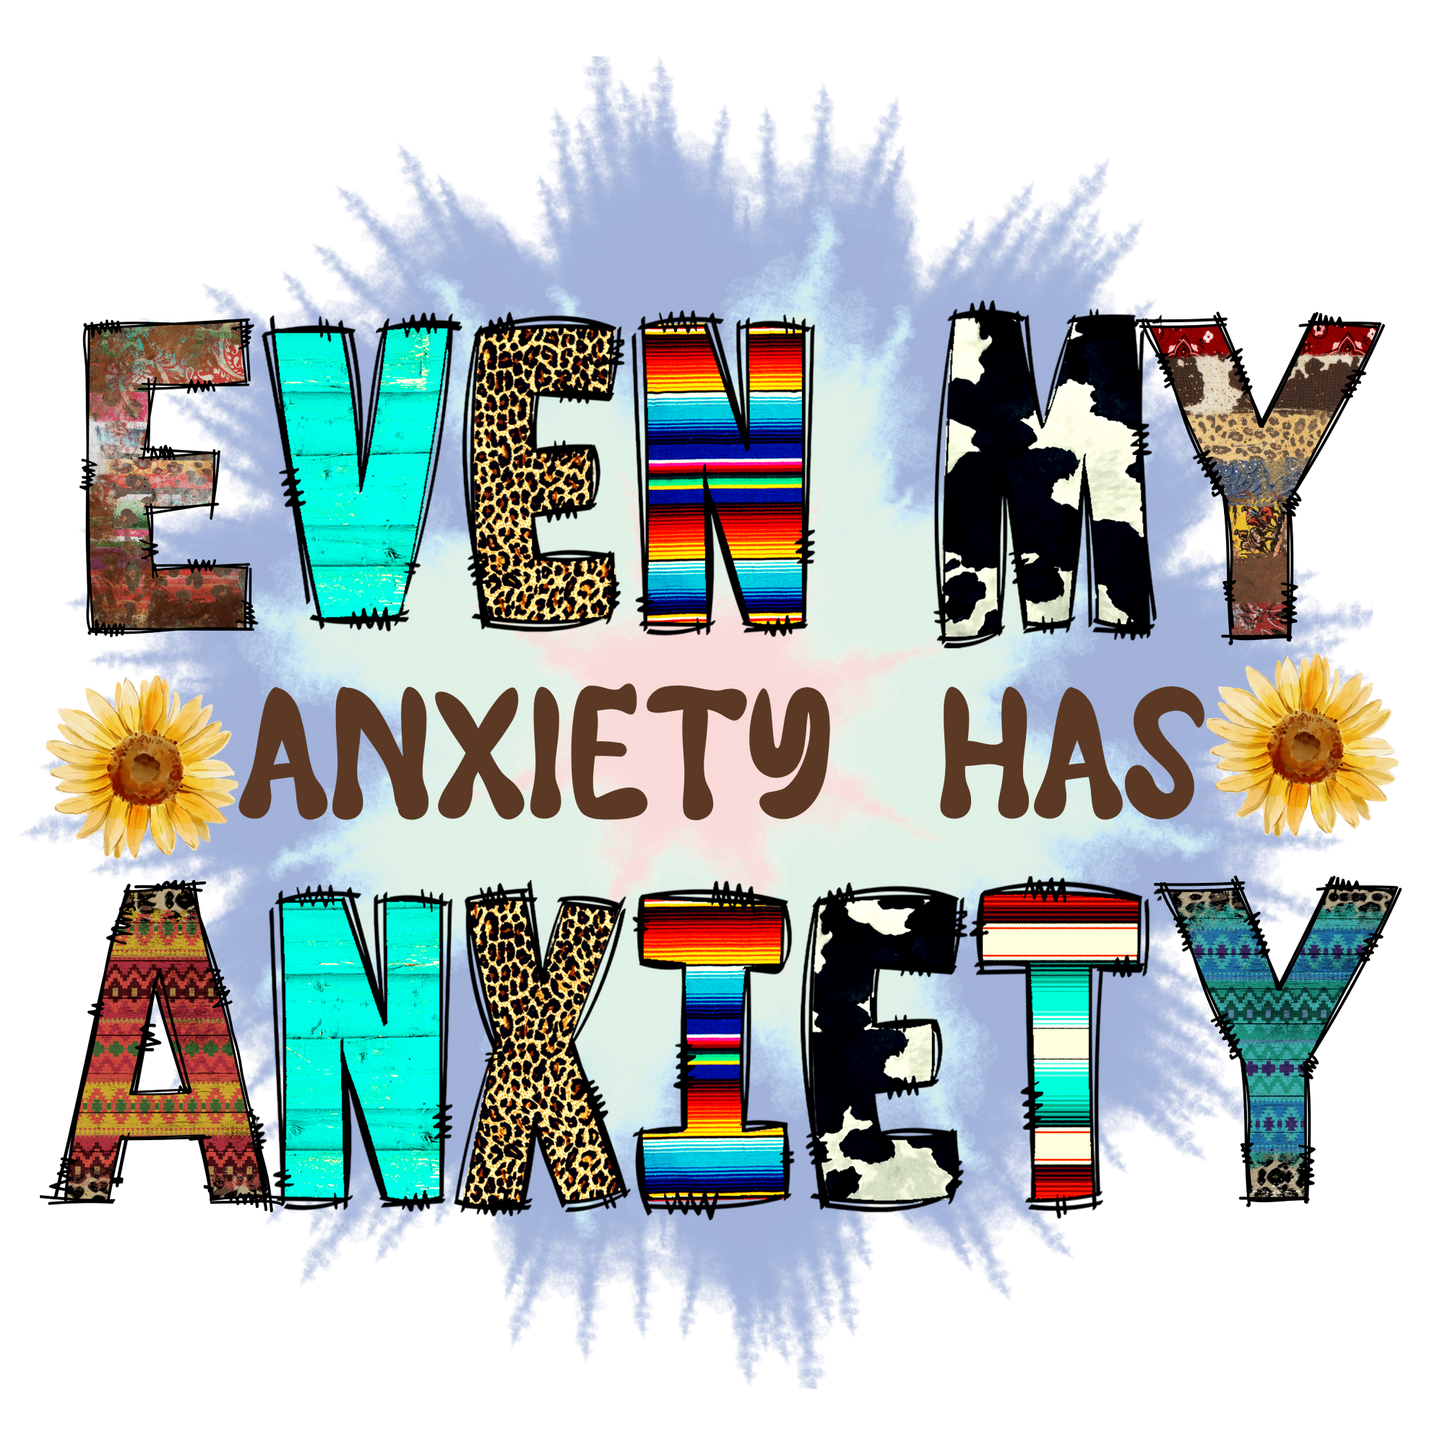 EVEN MY ANXIETY HAS ANXIETY